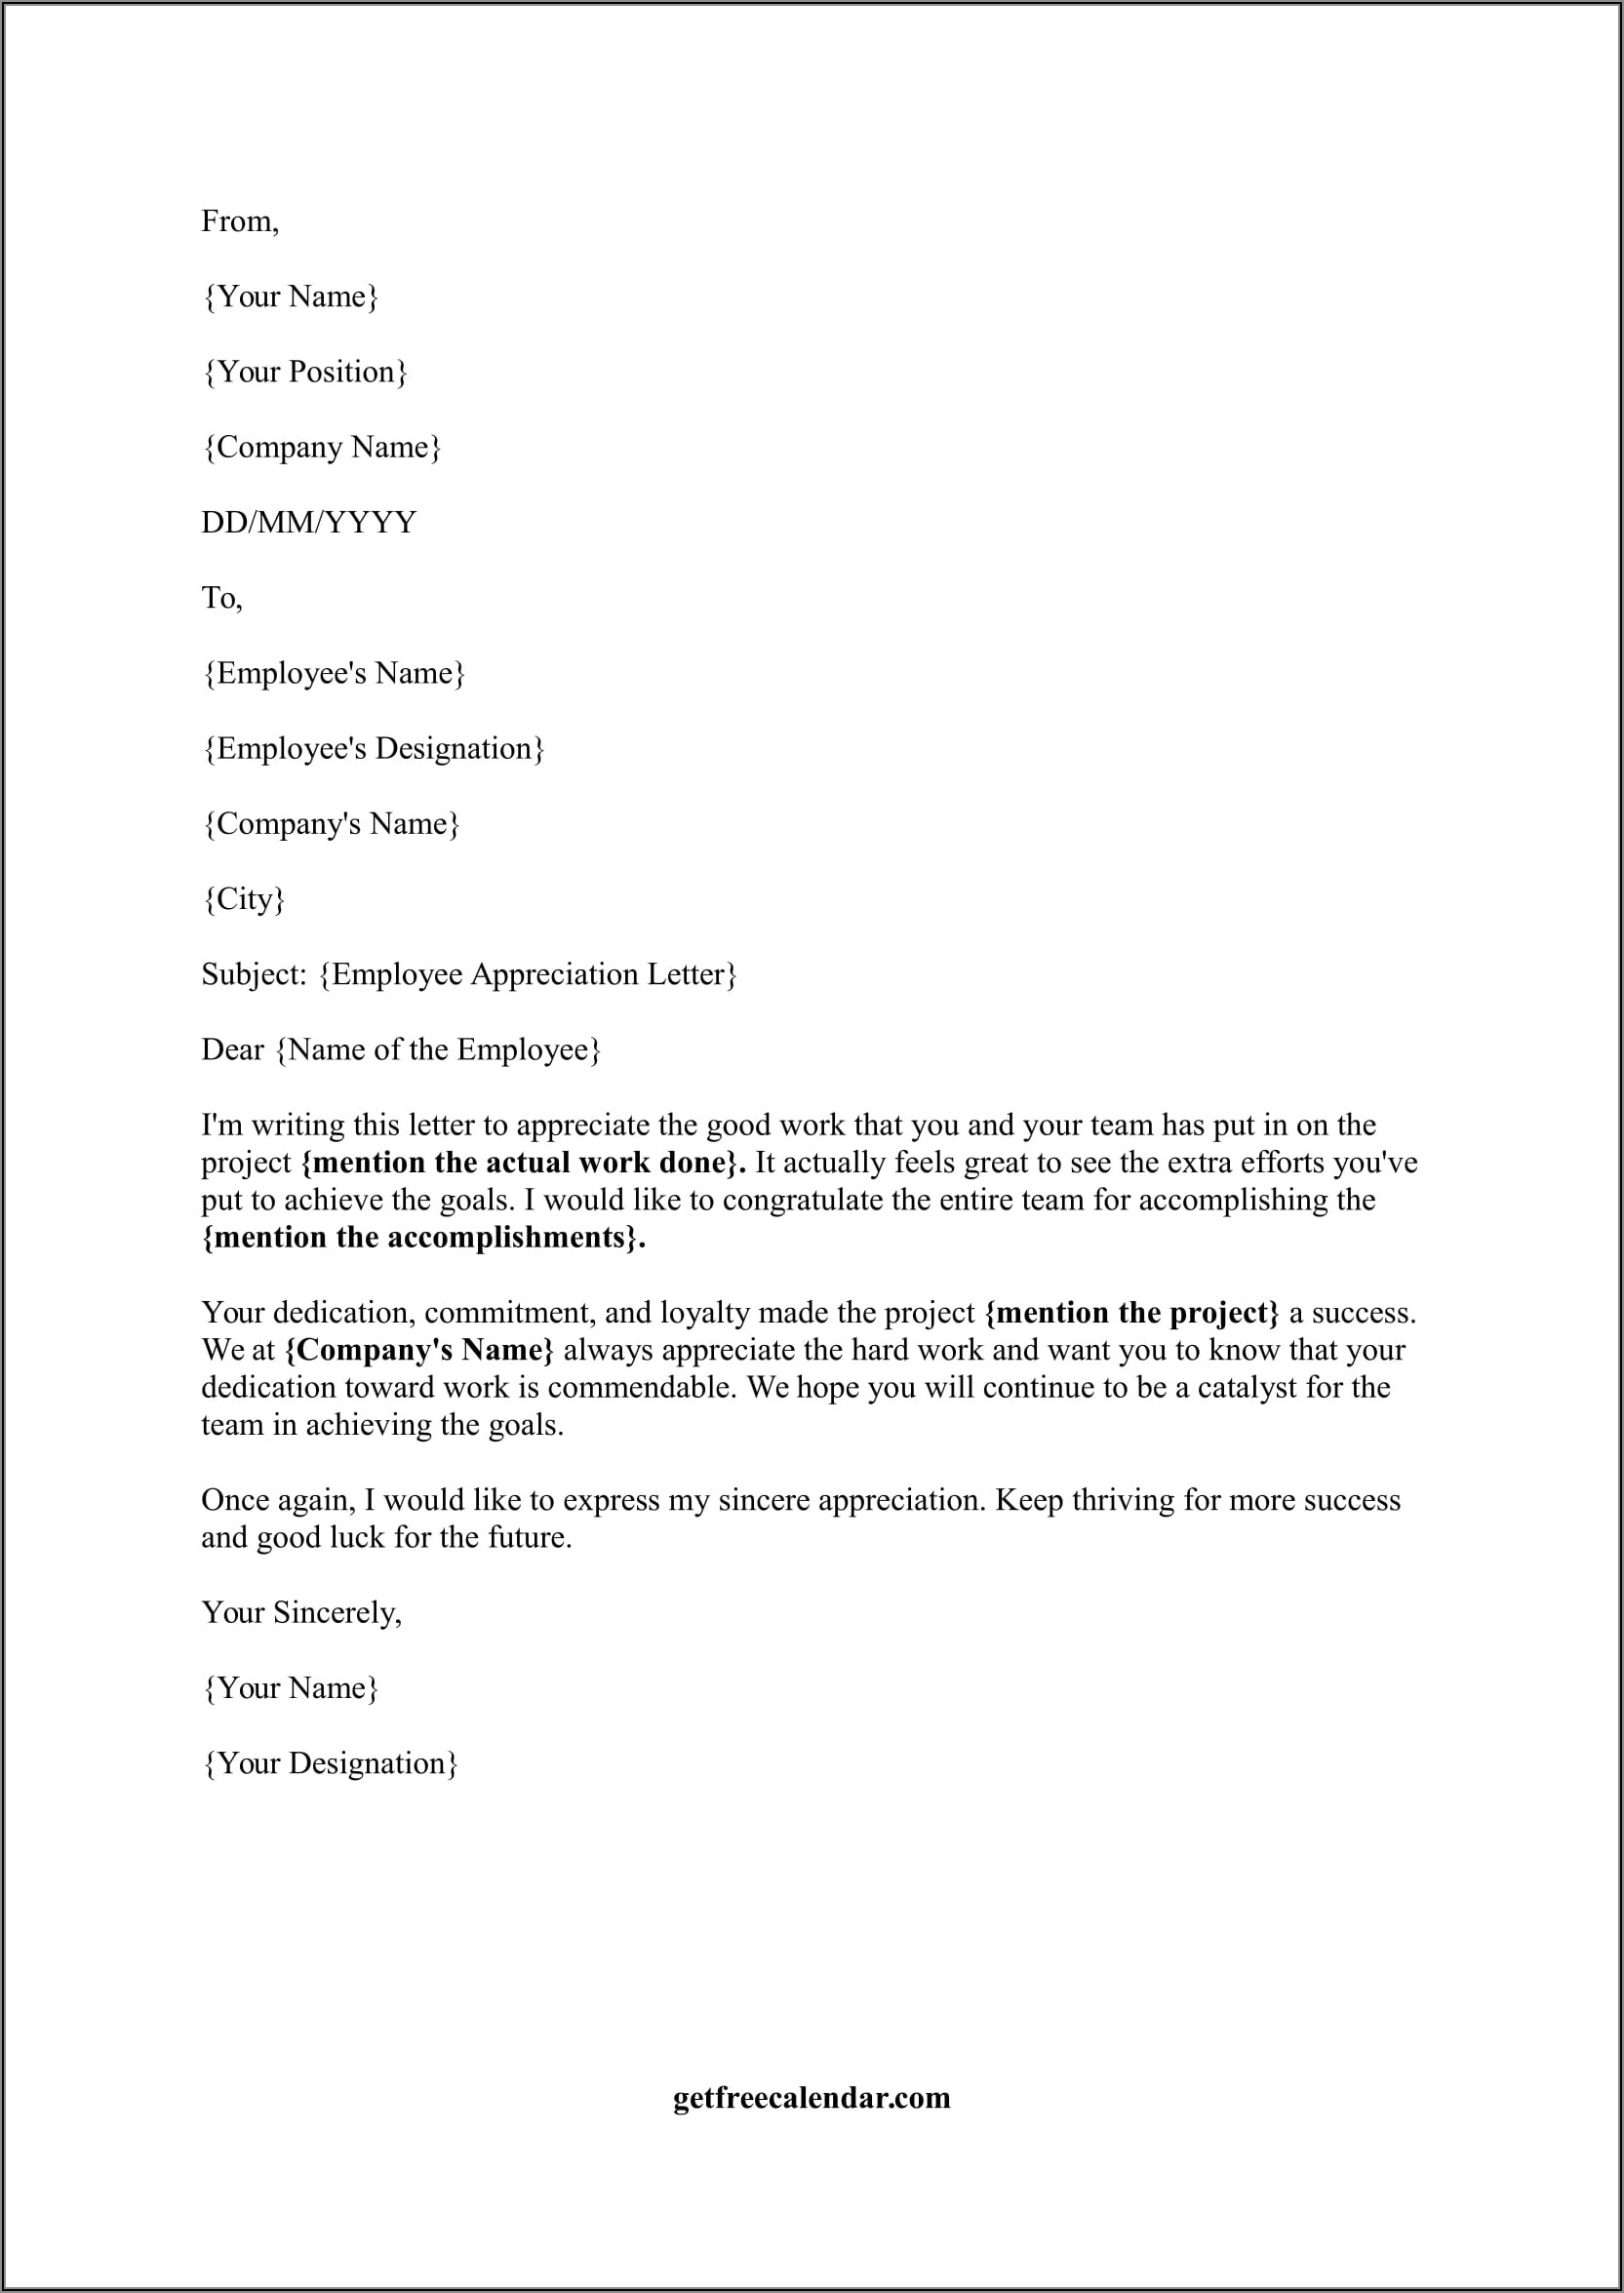 Sample Appreciation Letter To Employee For Hard Work